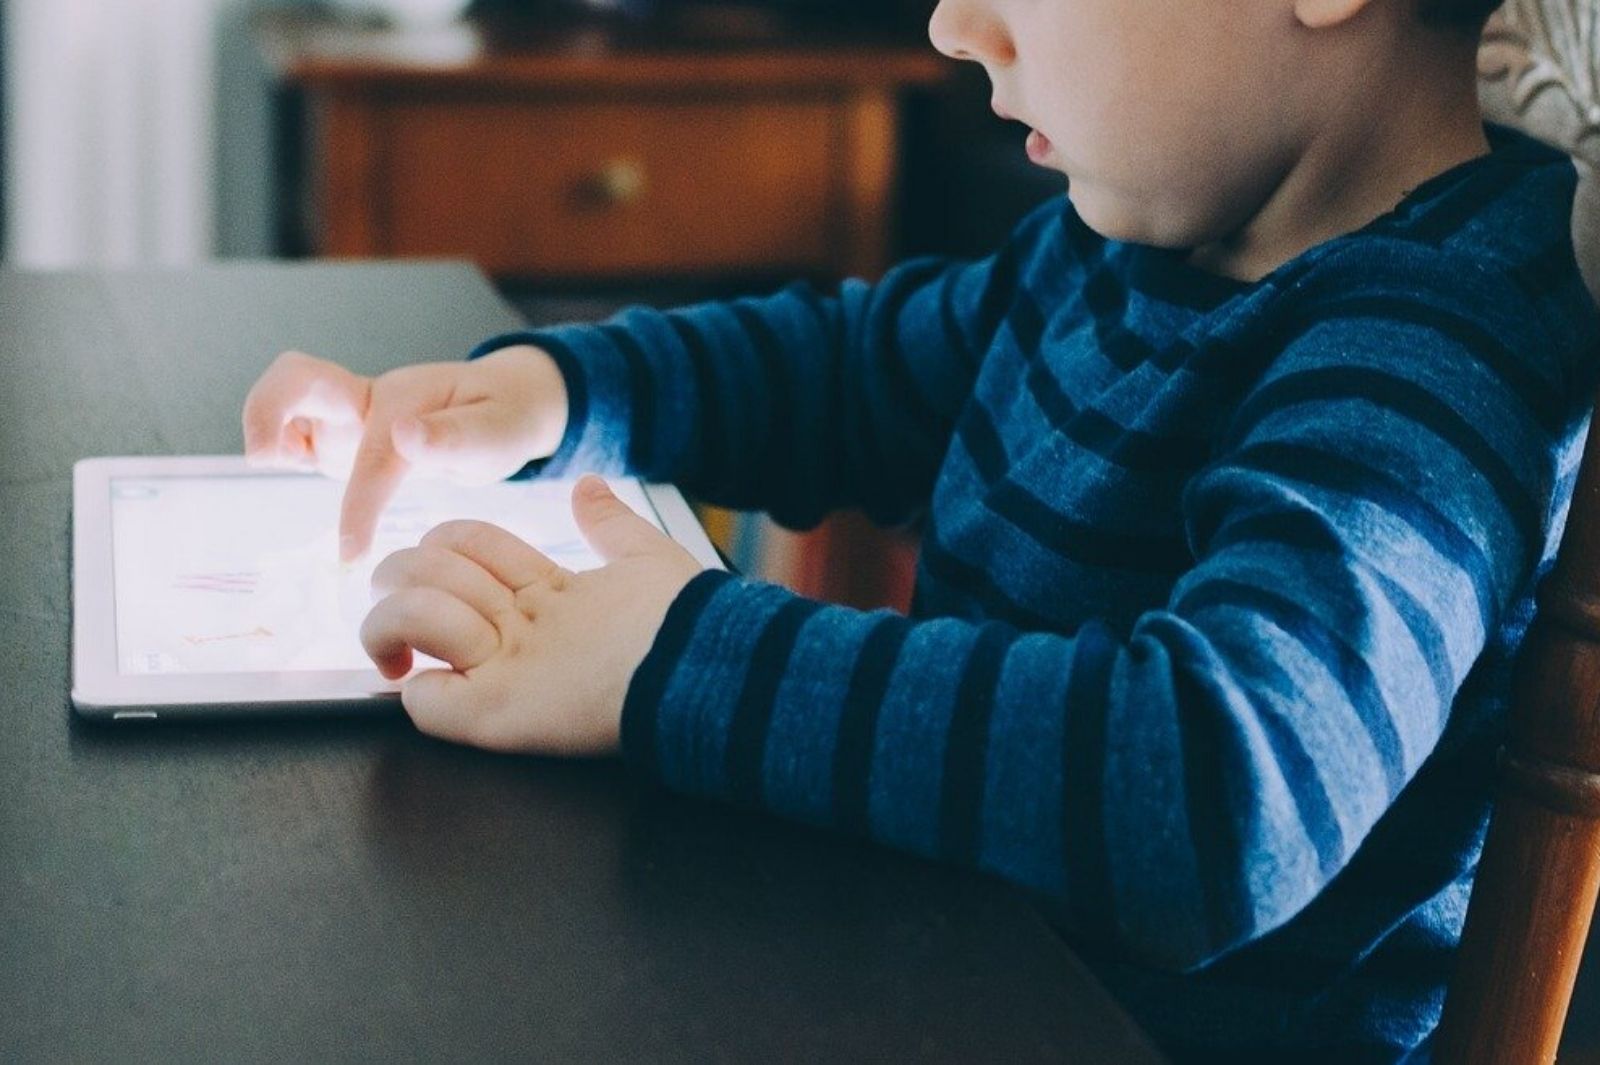 Photo of a young child looking at an ipad